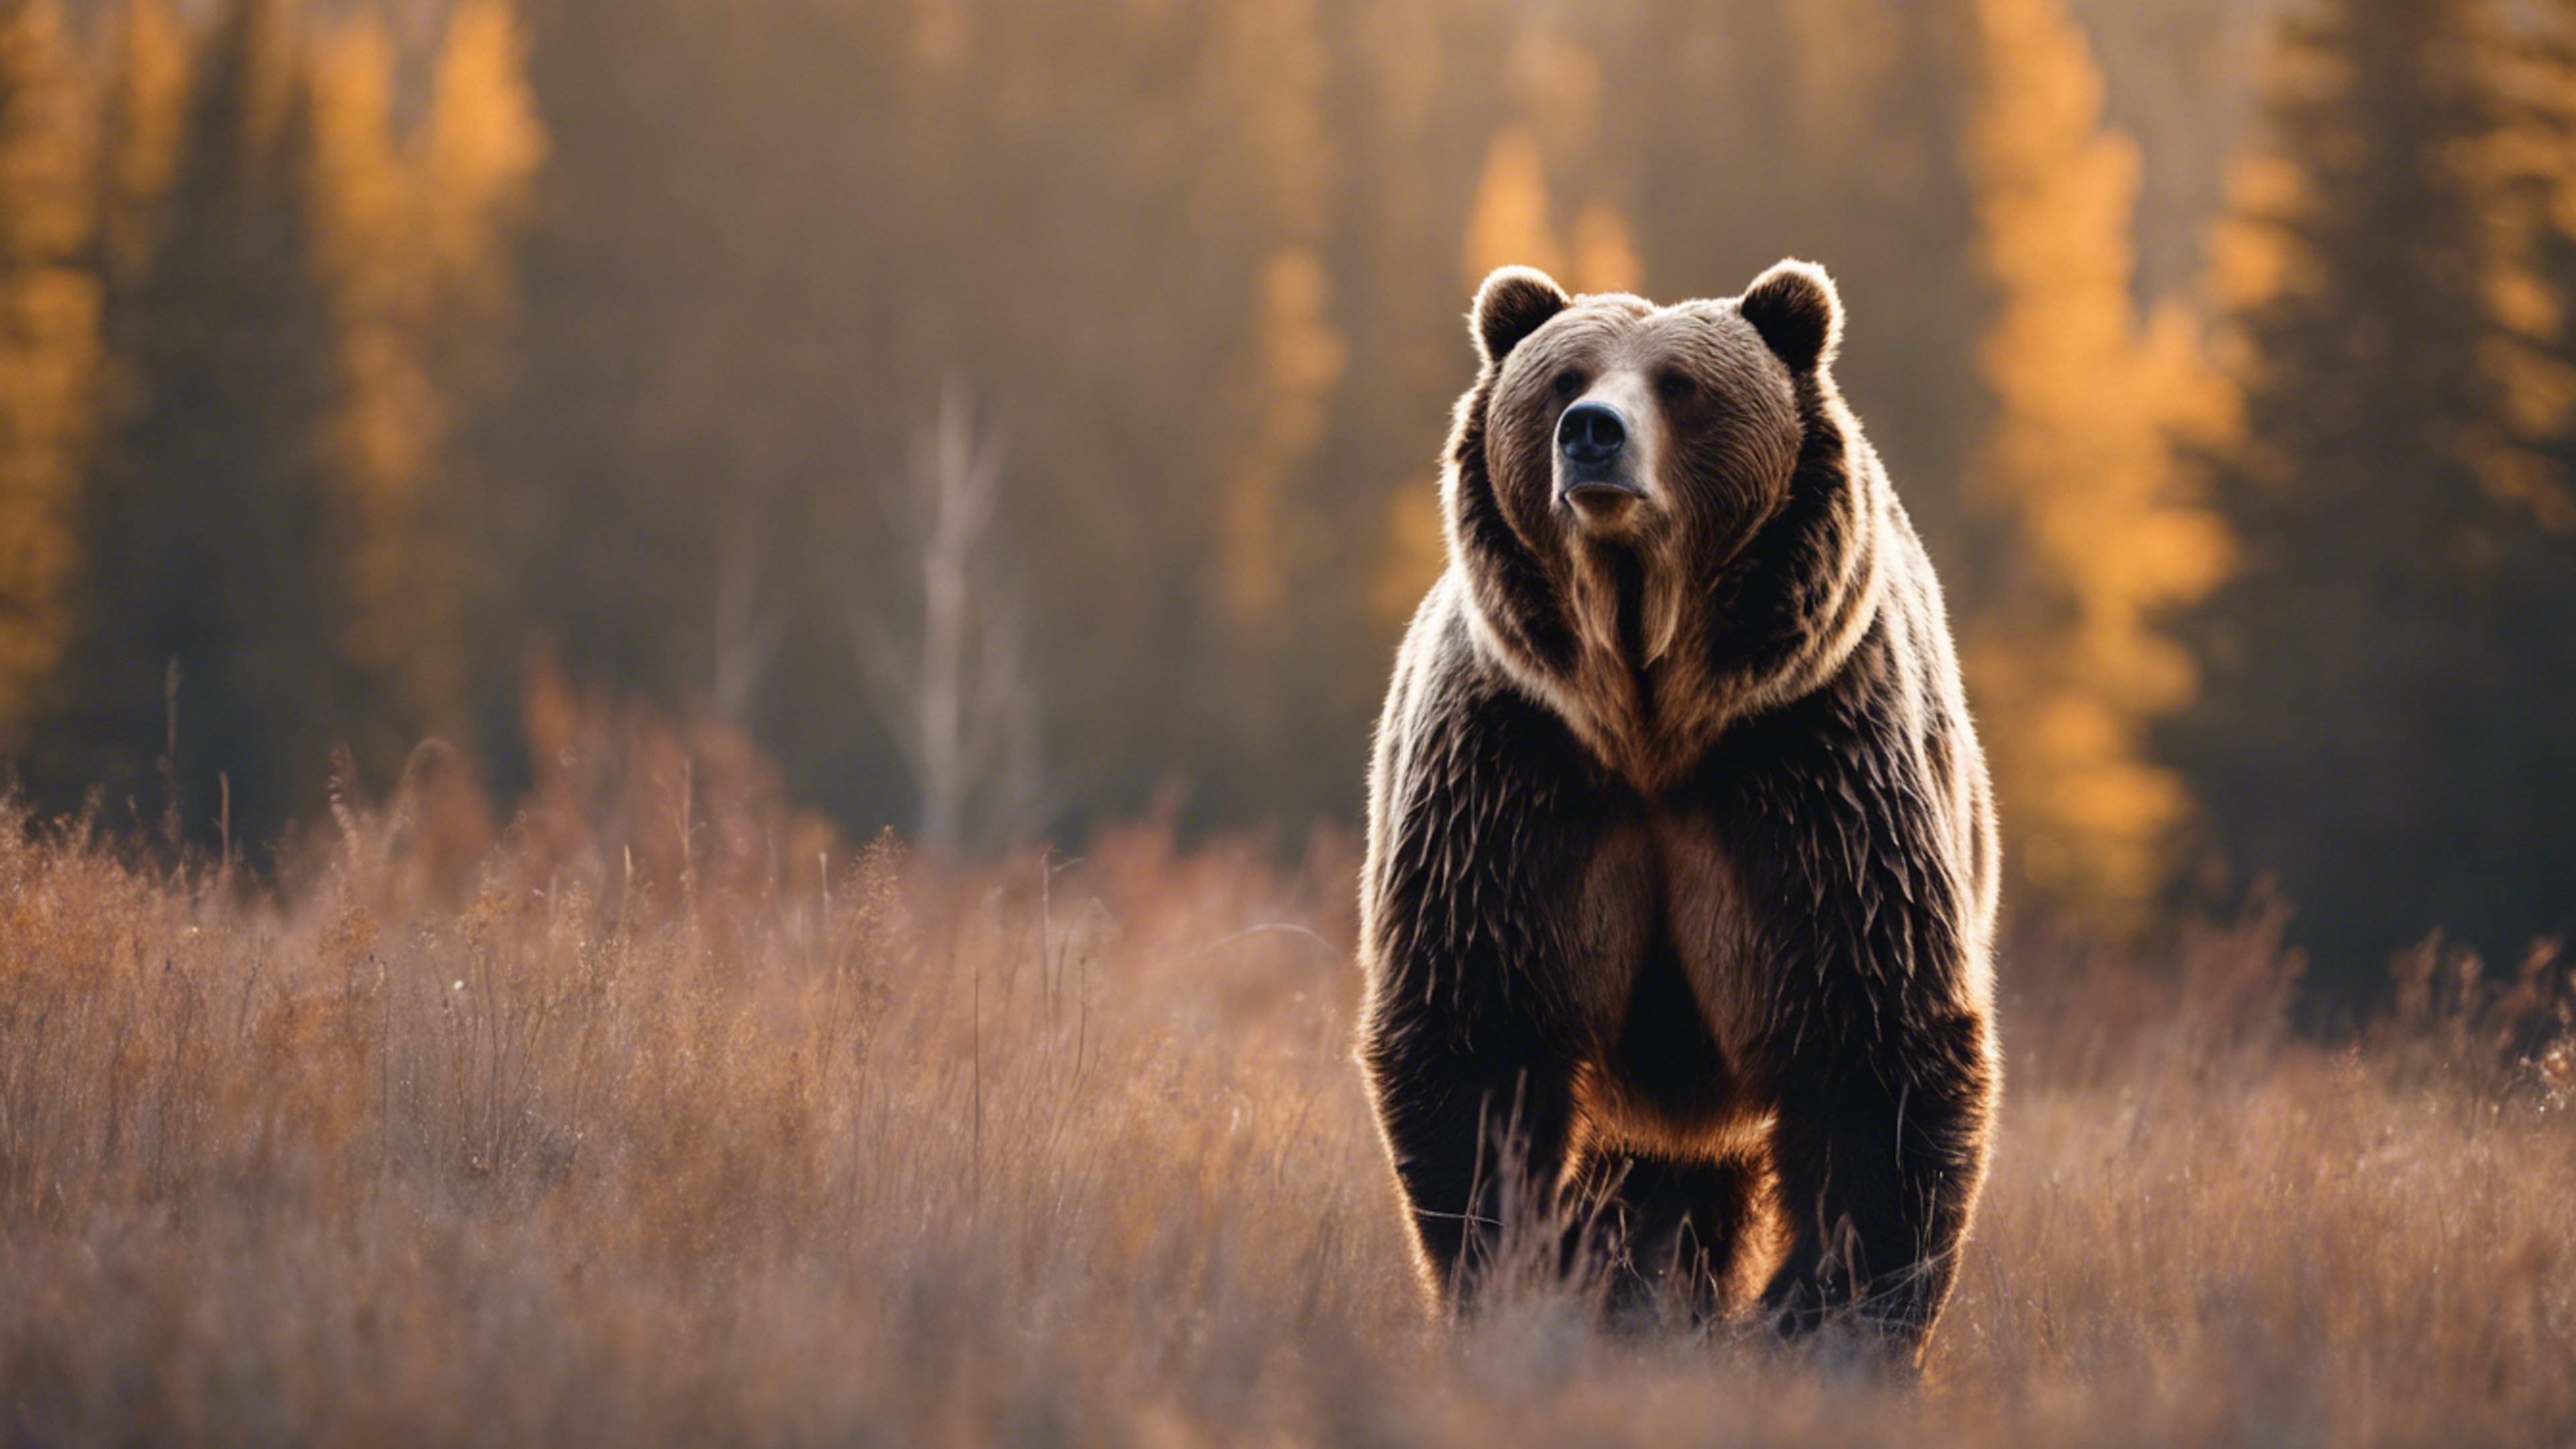 A majestic brown grizzly bear standing tall in the wild Tapet[4fb1e3b24f2c4984aff0]